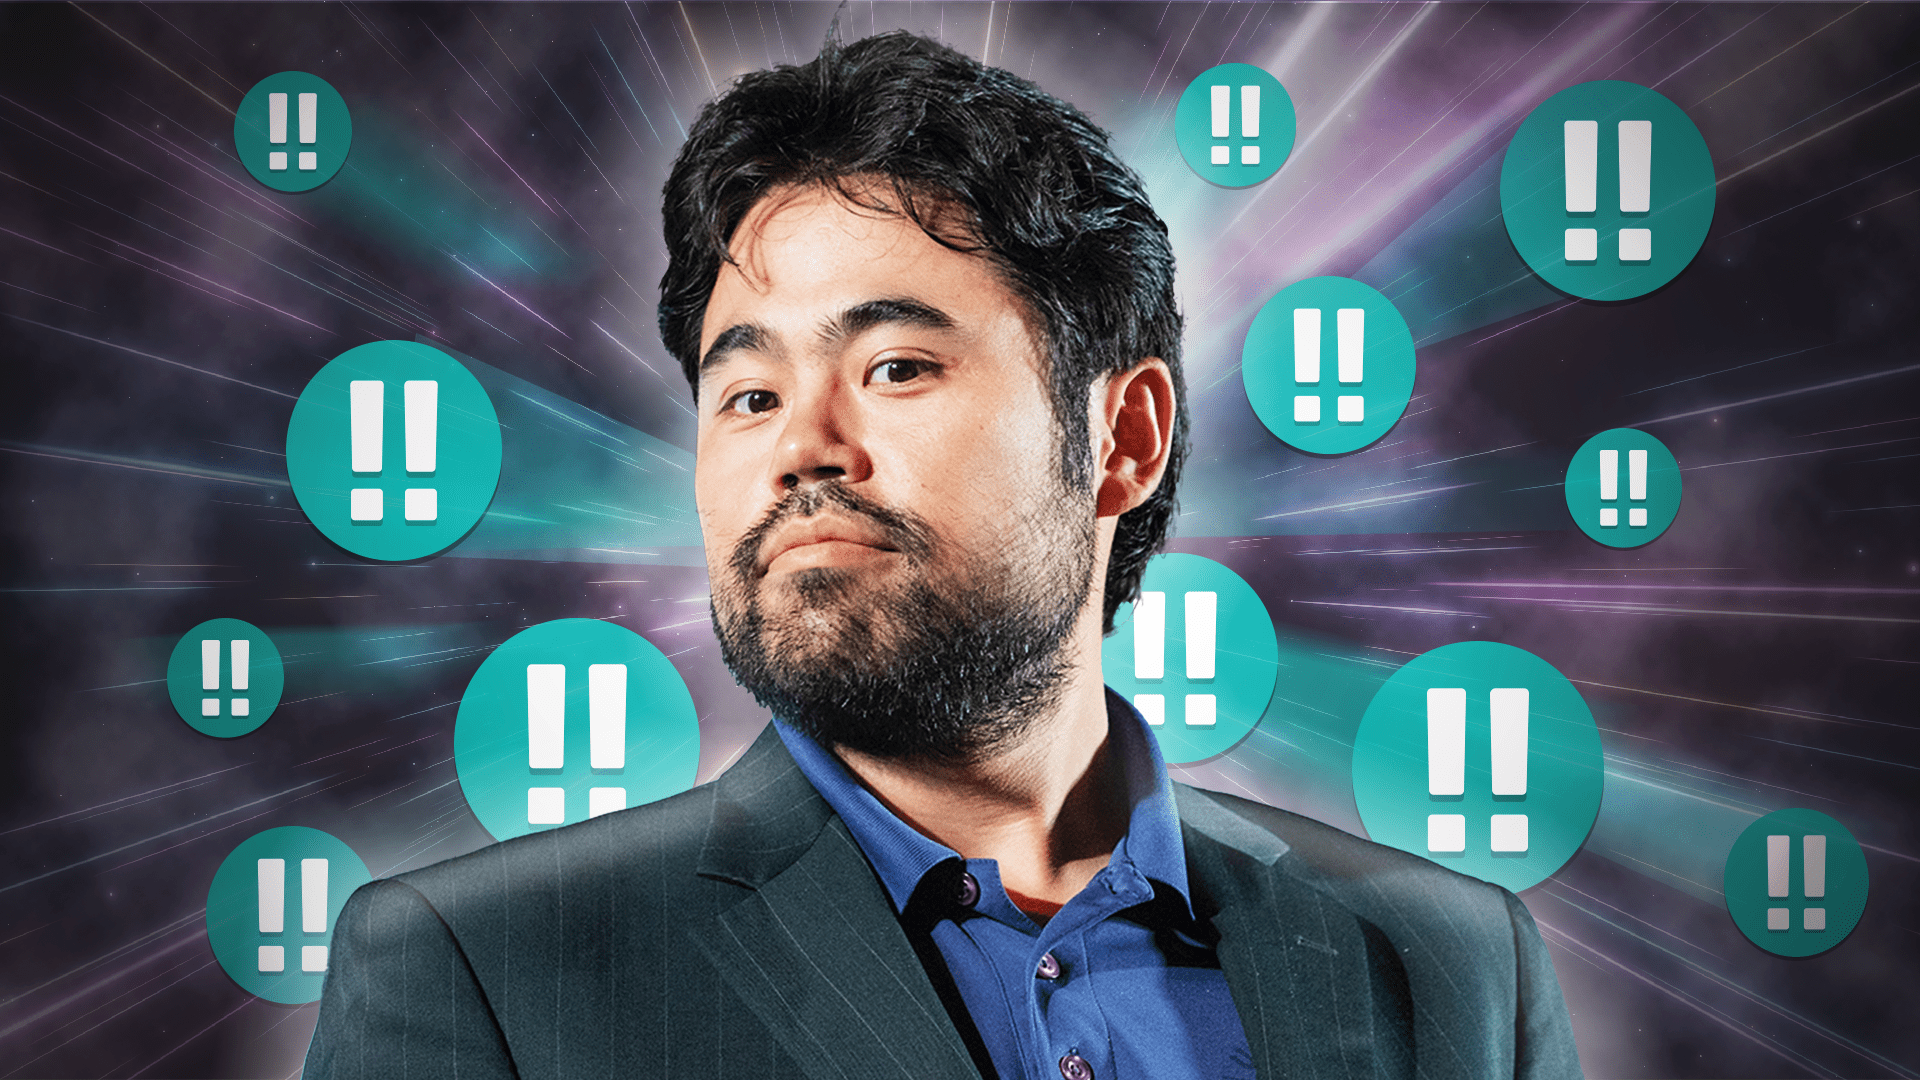 Hikaru Nakamura - I took a day off today but my team was busy at work. If  you missed me today, here's 2 hours of chess vs Cloud9's @penguingm1 GM  Andrew Tang.